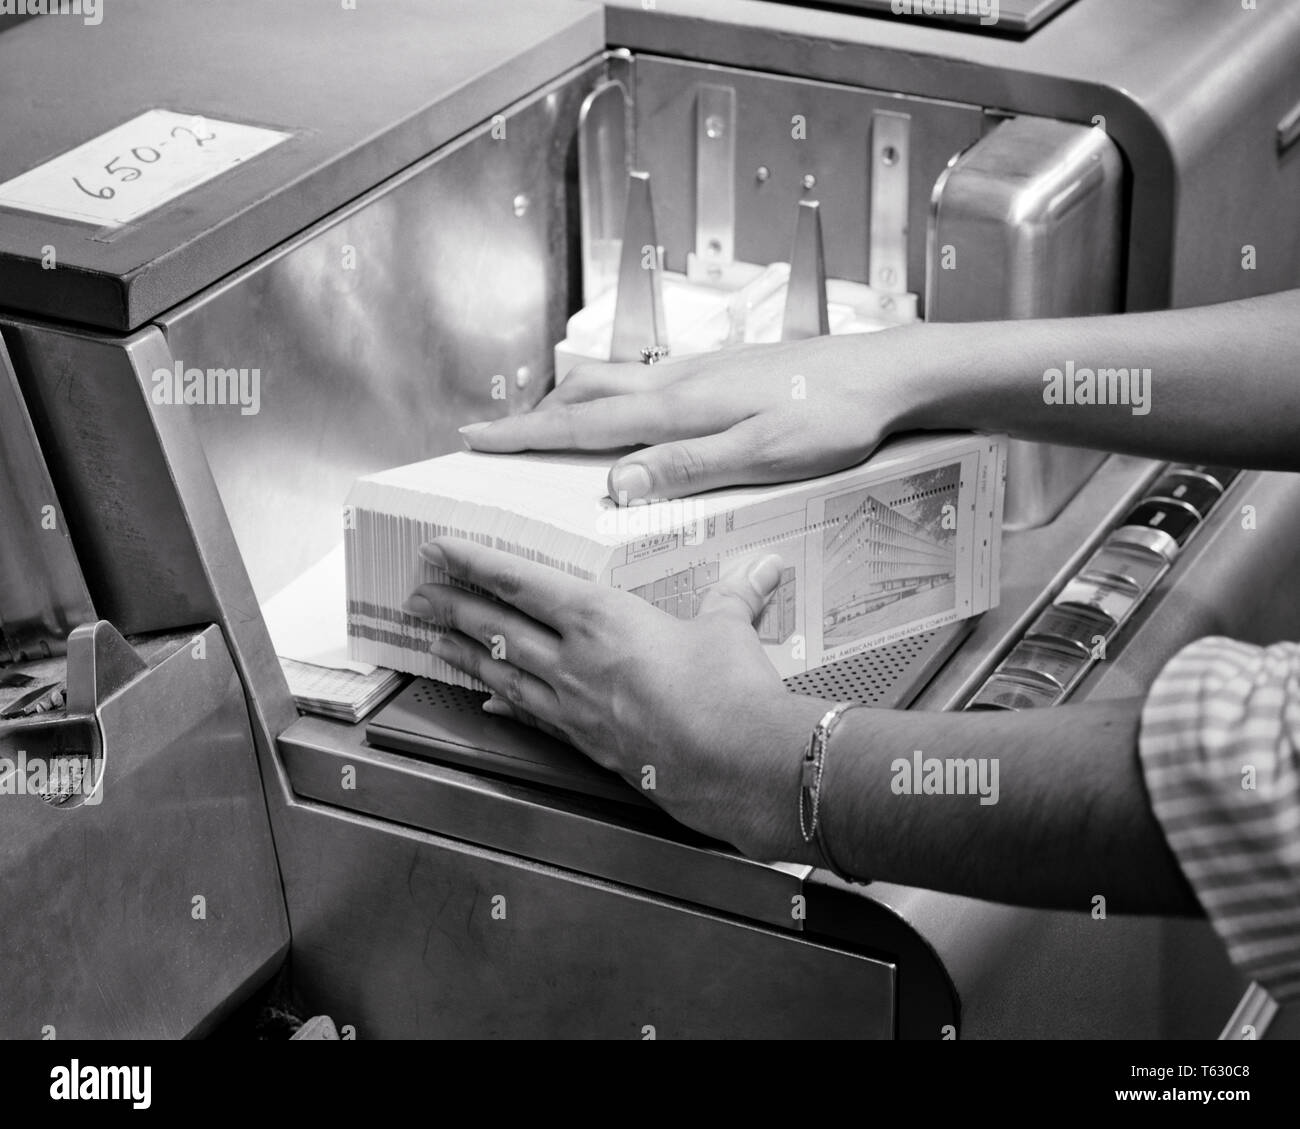 1960s WOMAN’S HANDS LOADING DATA PUNCHED CARDS INTO 20TH CENTURY COMPUTER CARD READER MACHINE - s11208 HAR001 HARS OCCUPATION SKILLS 20TH CENTURY PROGRESS INNOVATION BY INTO OCCUPATIONS HIGH TECH CONCEPTUAL CLOSE-UP HOLES READER INPUT OUTPUT PRECISION PUNCH CARD REPRESENTED BLACK AND WHITE CAUCASIAN ETHNICITY HAR001 OBSOLETE OLD FASHIONED Stock Photo